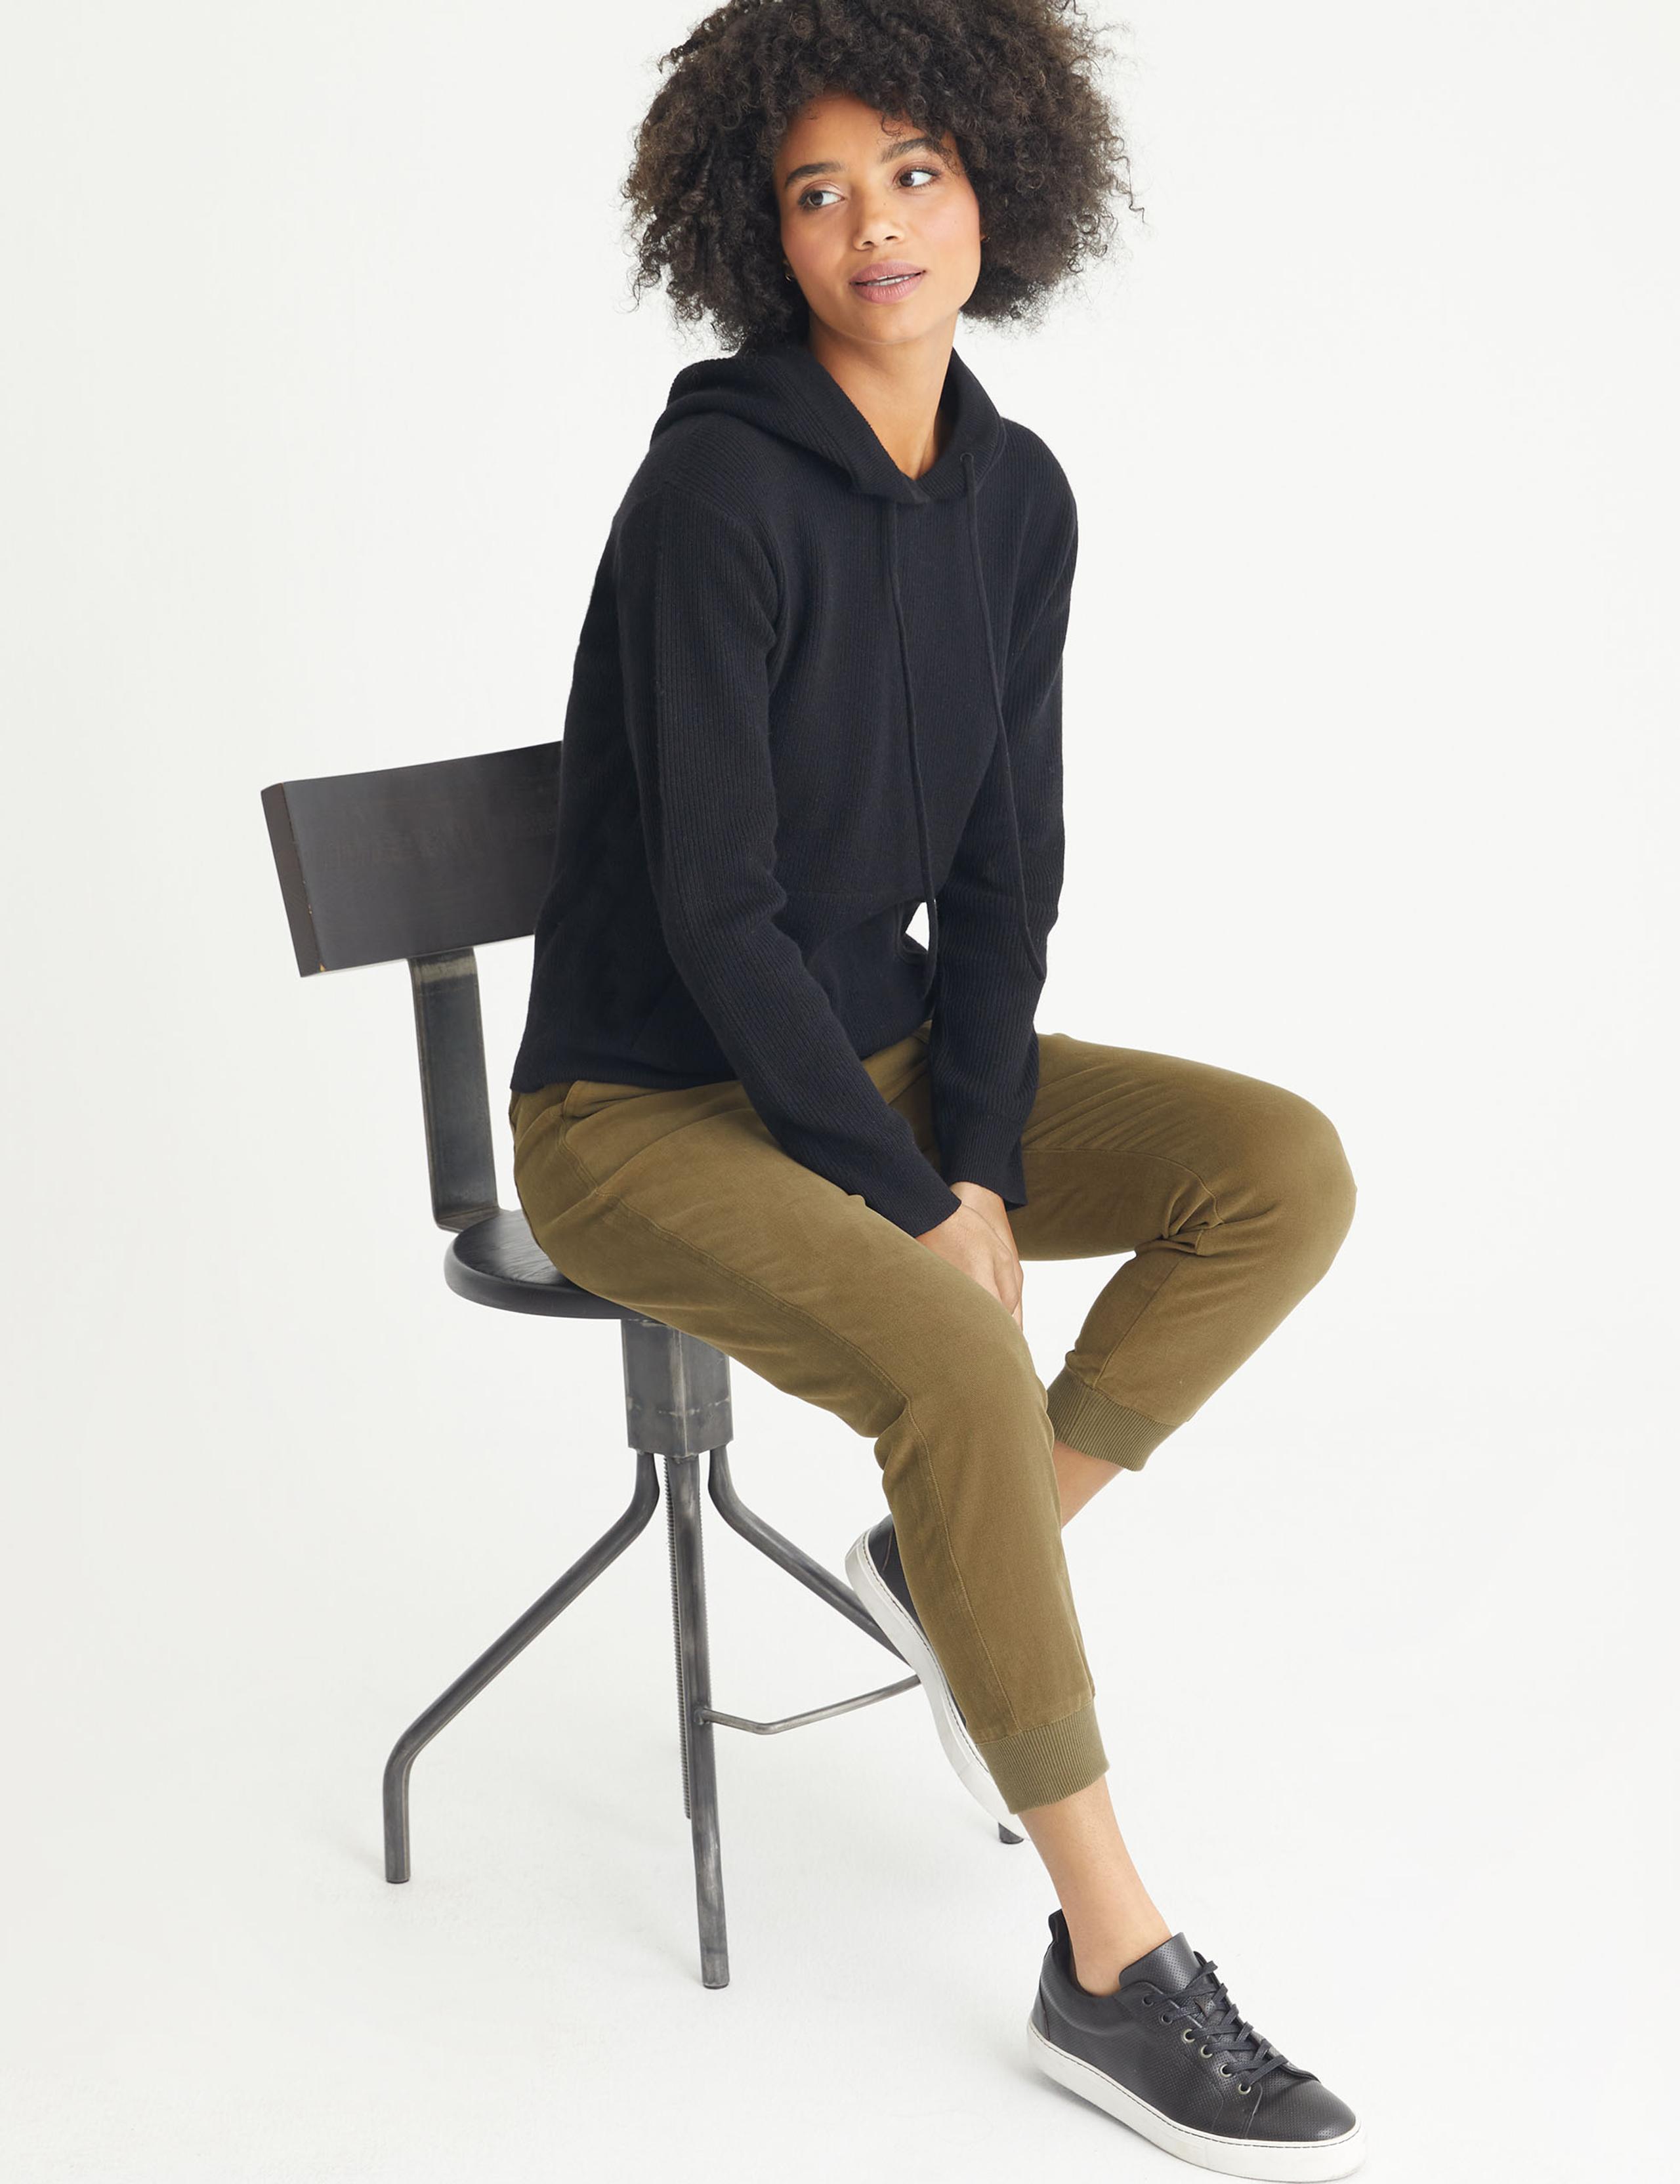 Women wearing Friday Pant on a stool